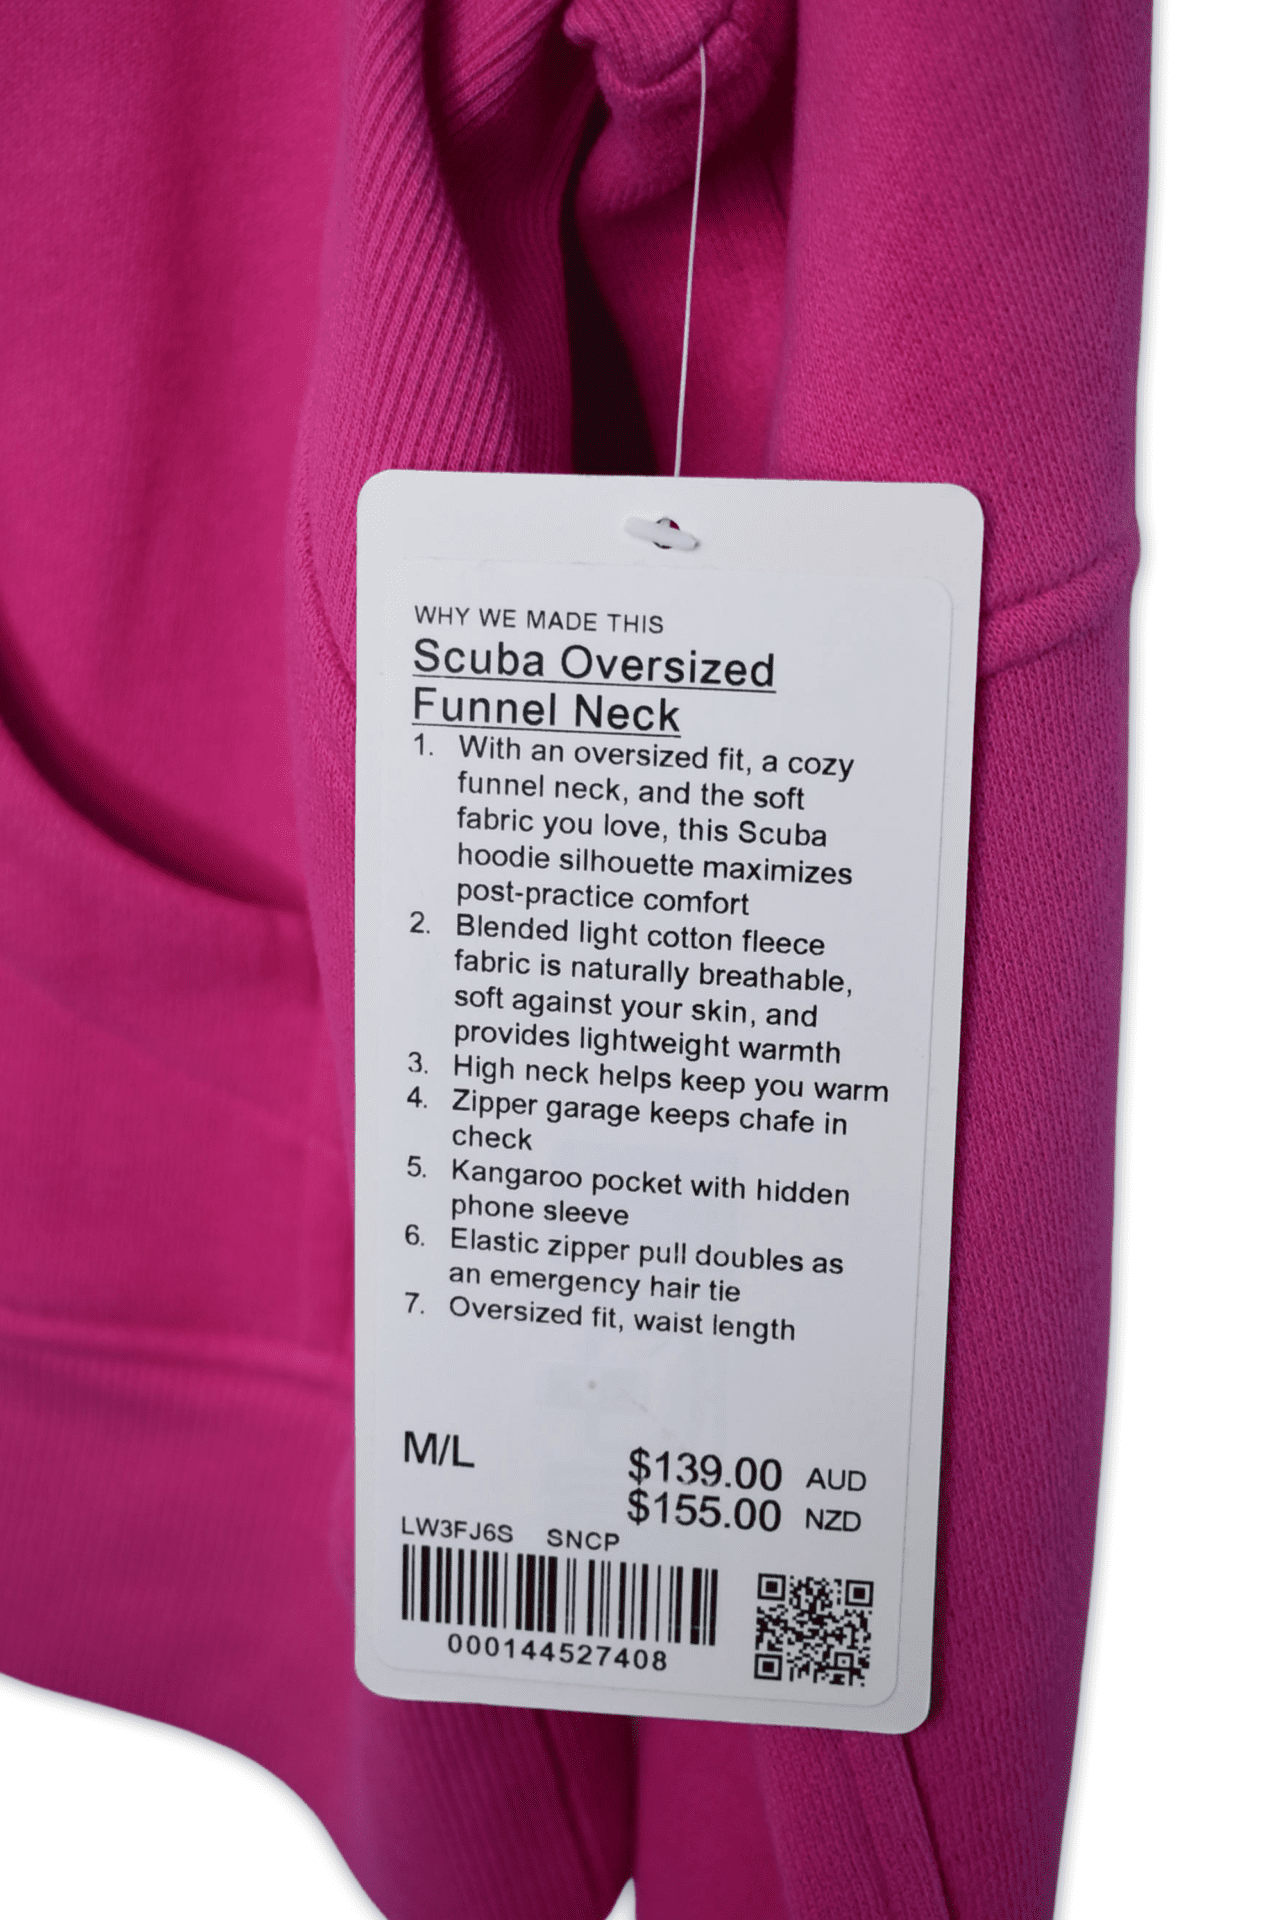 M/L Bright pink A scuba oversized funnel neck from lululemon, cropped at the waist featuring a kangaroo pocket with hidden sleeve, elastic zipper which doubles as an emergence hair tie, and zipper garage to stop any chafing.